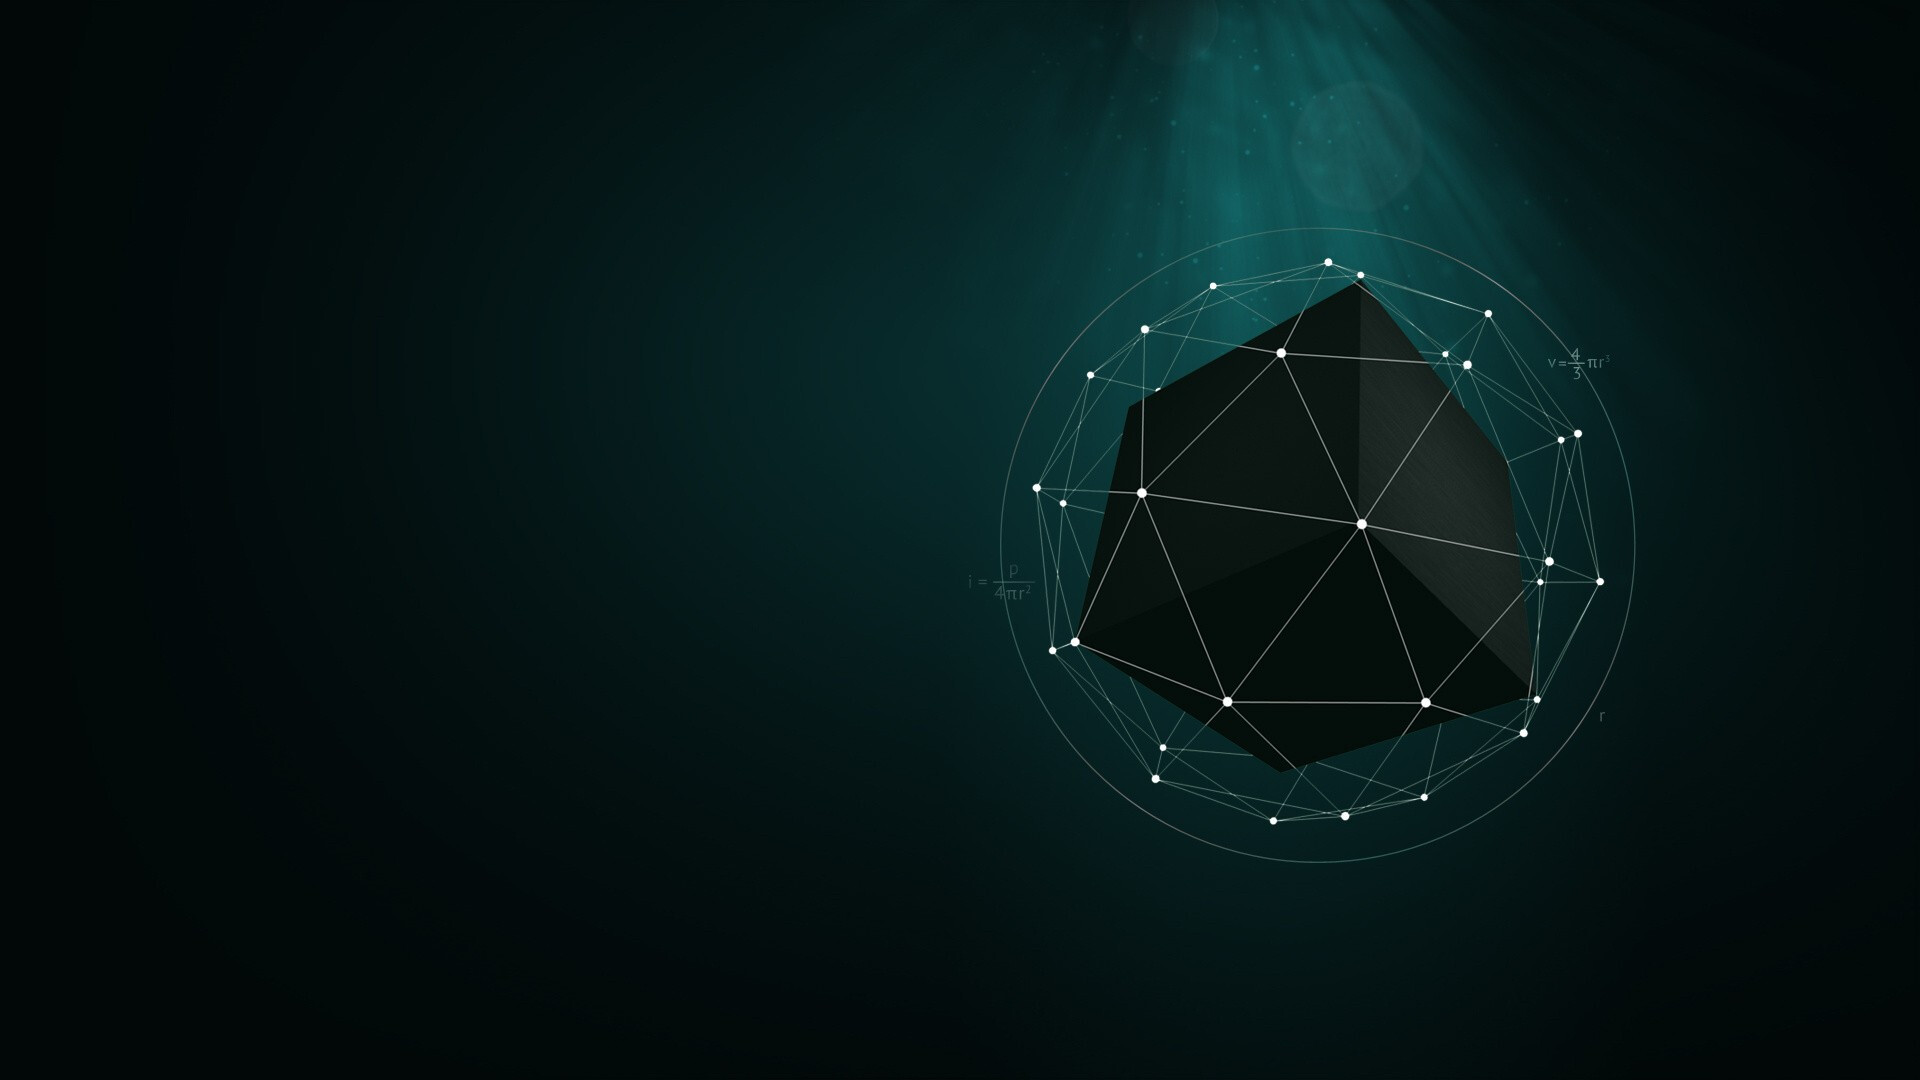 Geometry: Lines structure, Cube, Equilateral triangles, Frame. 1920x1080 Full HD Wallpaper.